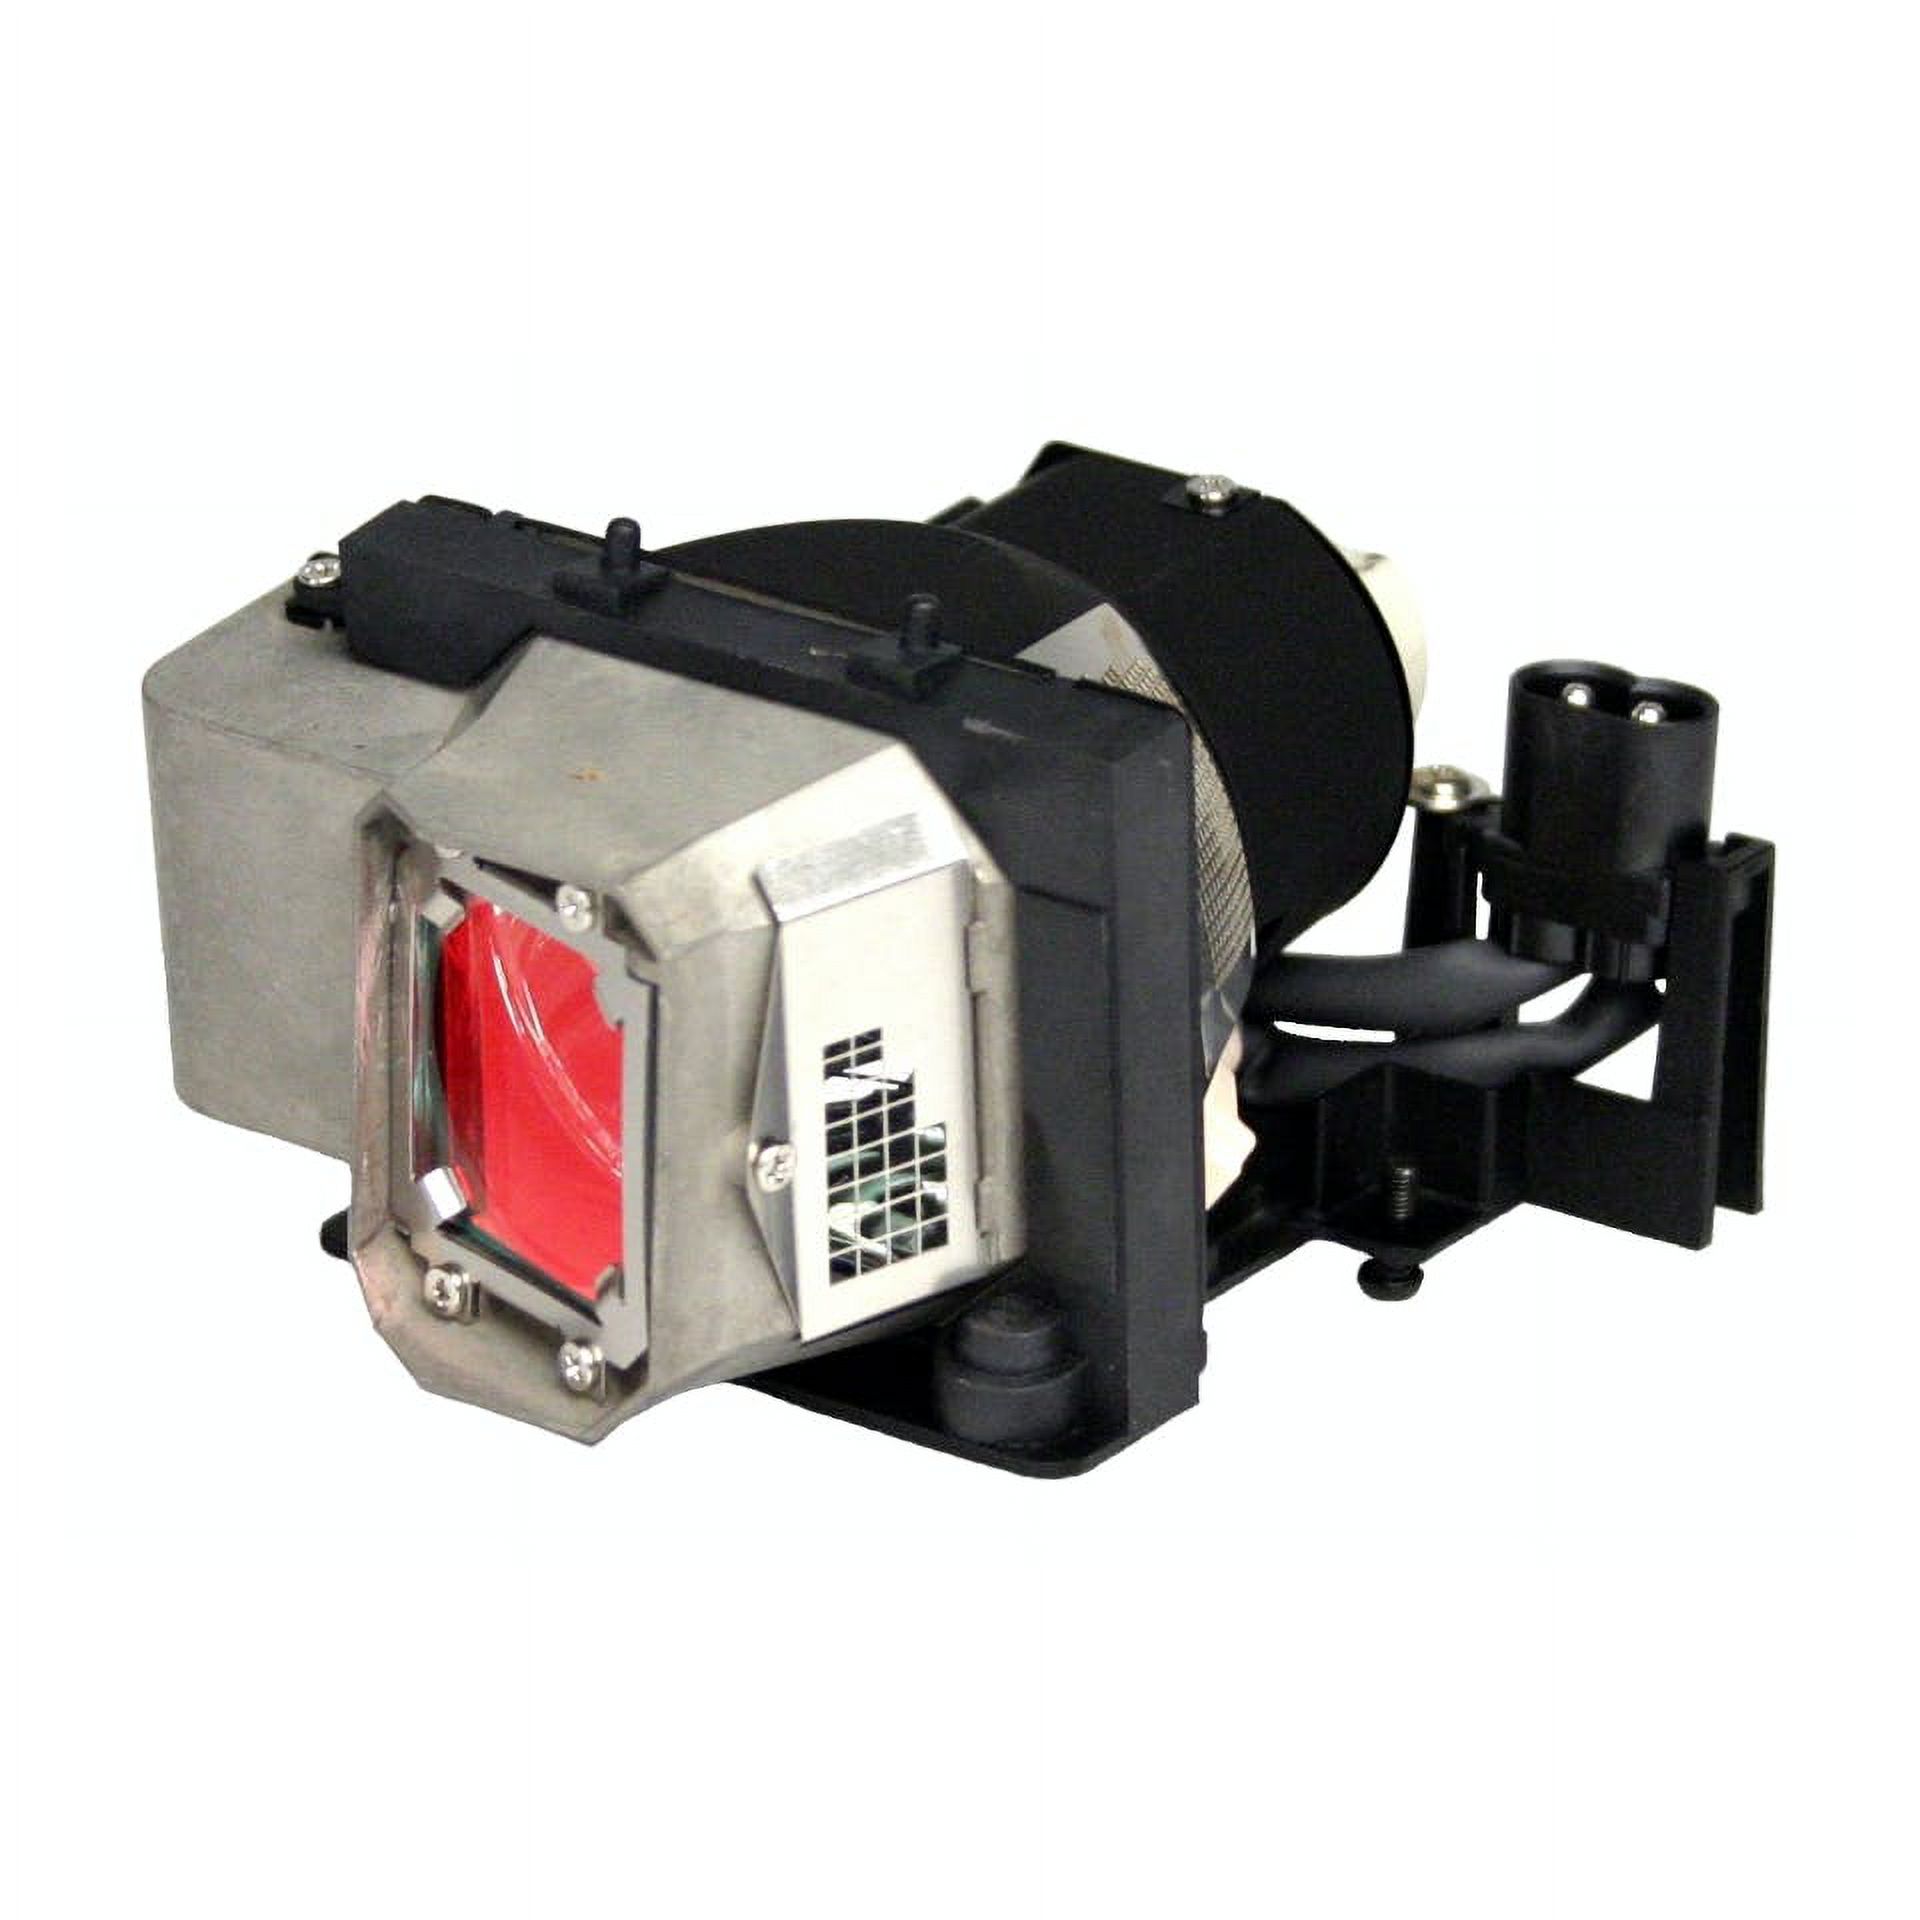 InFocus Replacement Projector Lamp, Black - image 1 of 1